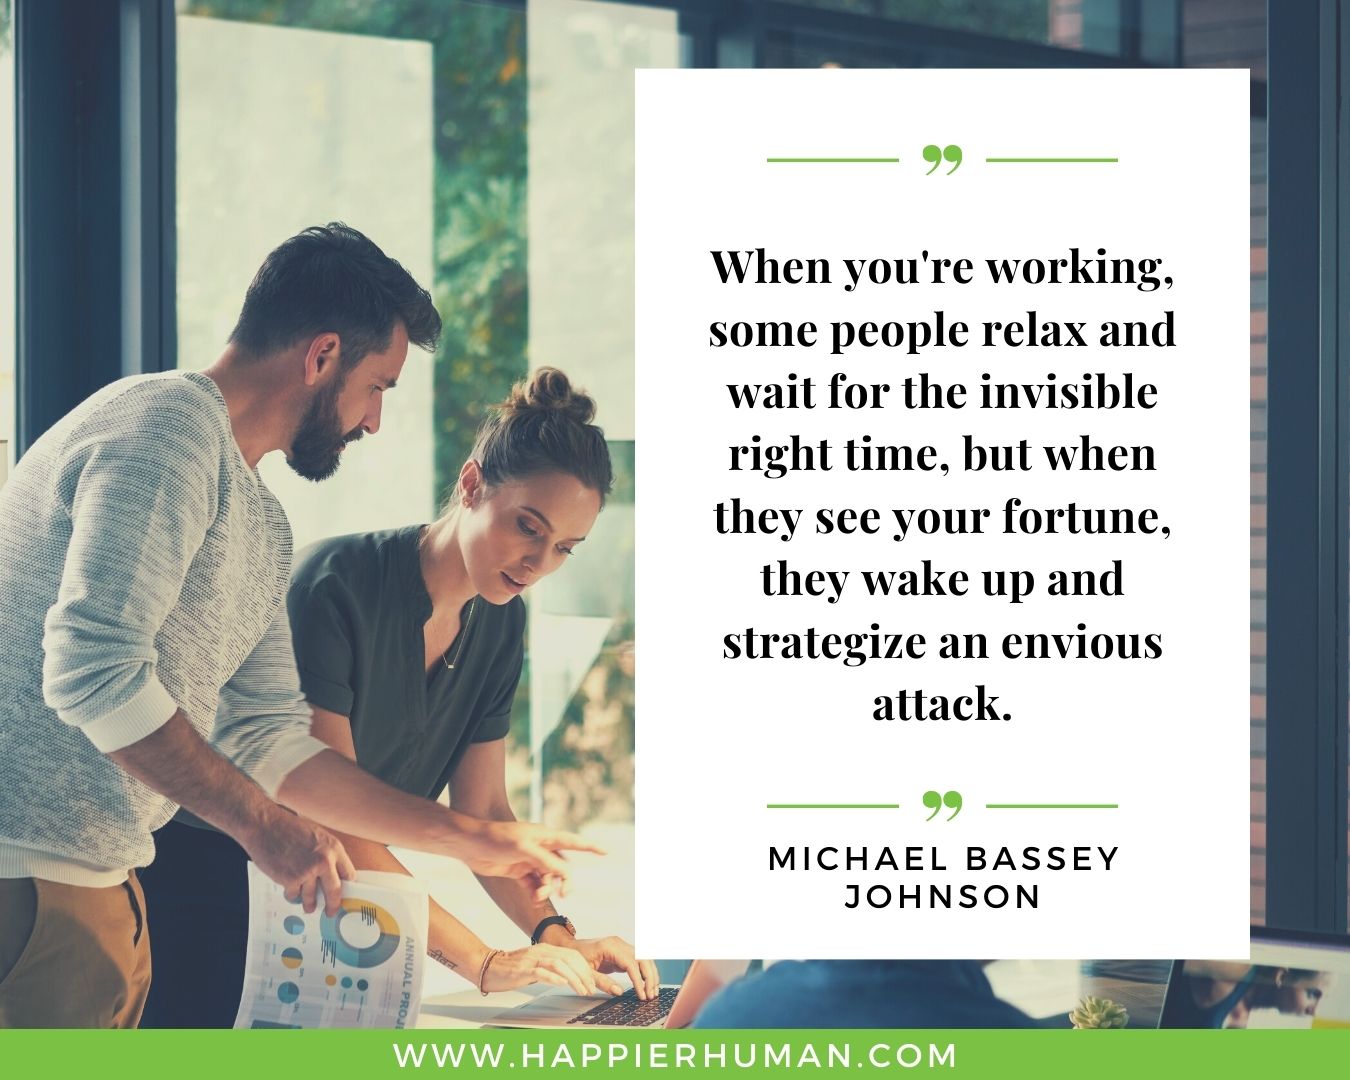 Haters Quotes - “When you're working, some people relax and wait for the invisible right time, but when they see your fortune, they wake up and strategize an envious attack.” - Michael Bassey Johnson